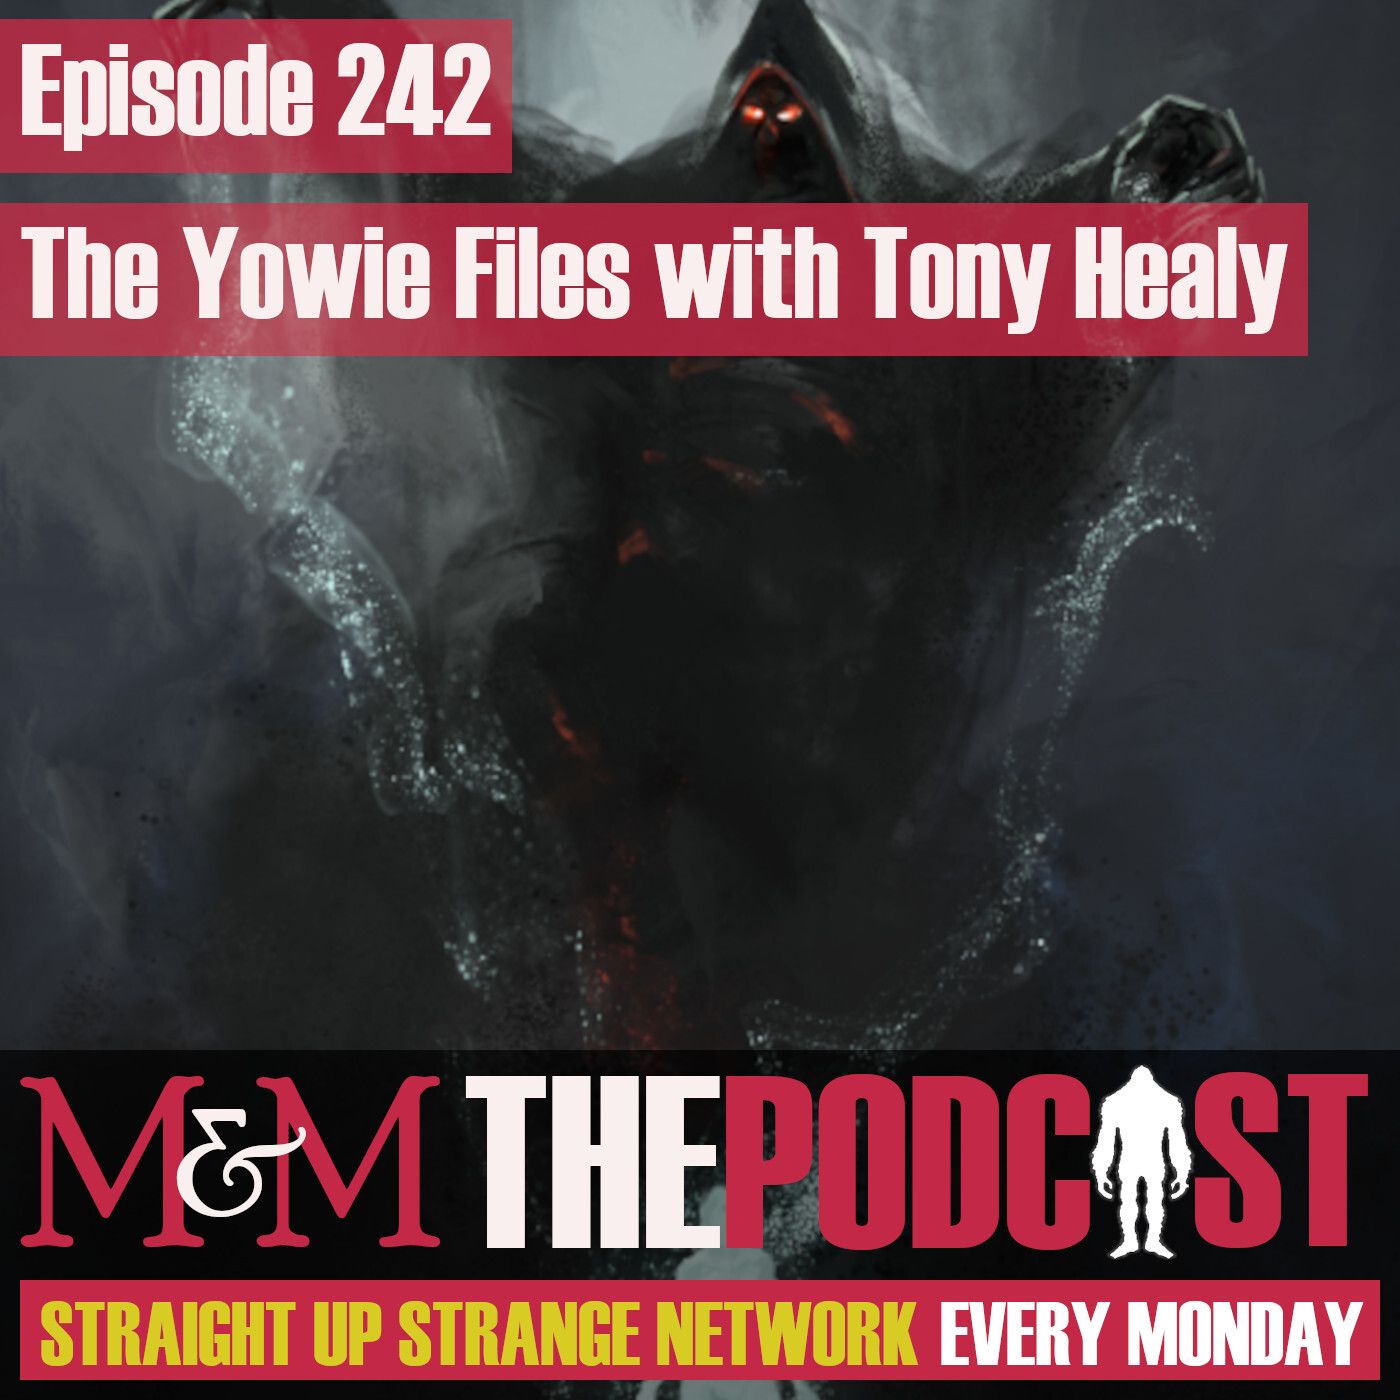 Mysteries and Monsters: Episode 242 The Yowie Files with Tony Healy